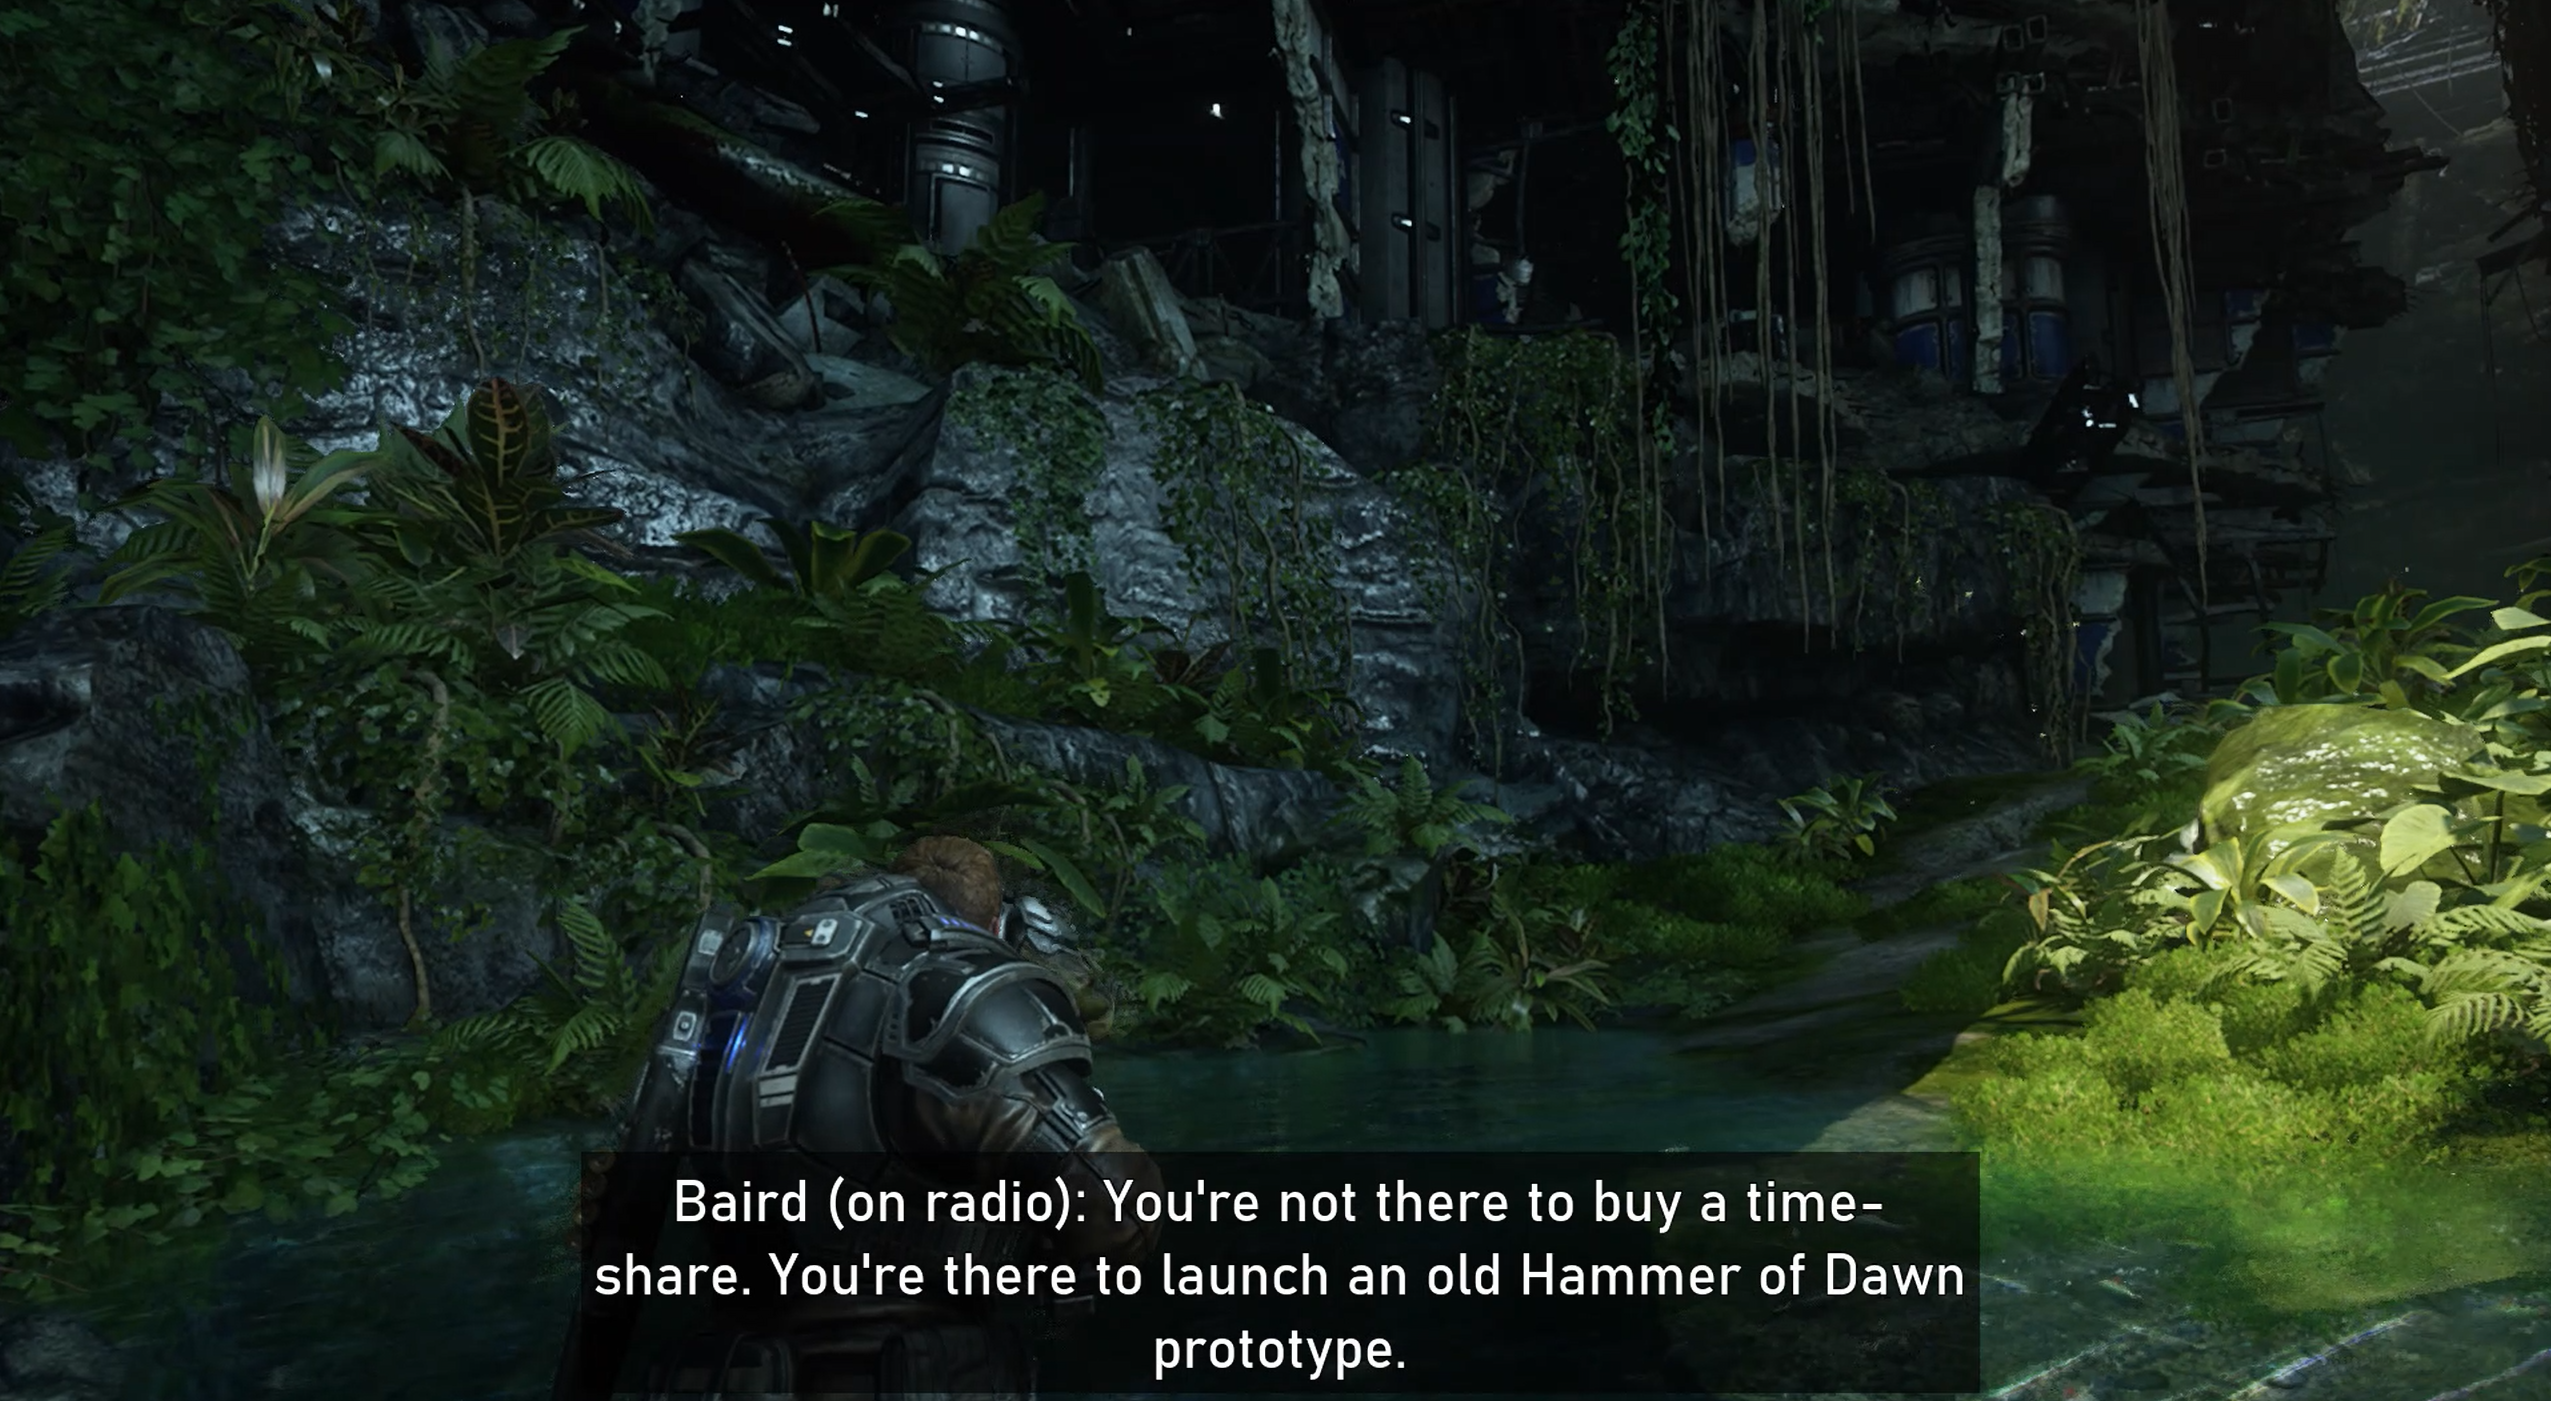 Gears 5 gameplay. The player is in the forest. The subtitles at the bottom of the screen says, "Baird (on radio): You're not there to buy a timeshare. You're there to launch an old Hammer of Dawn prototype." 